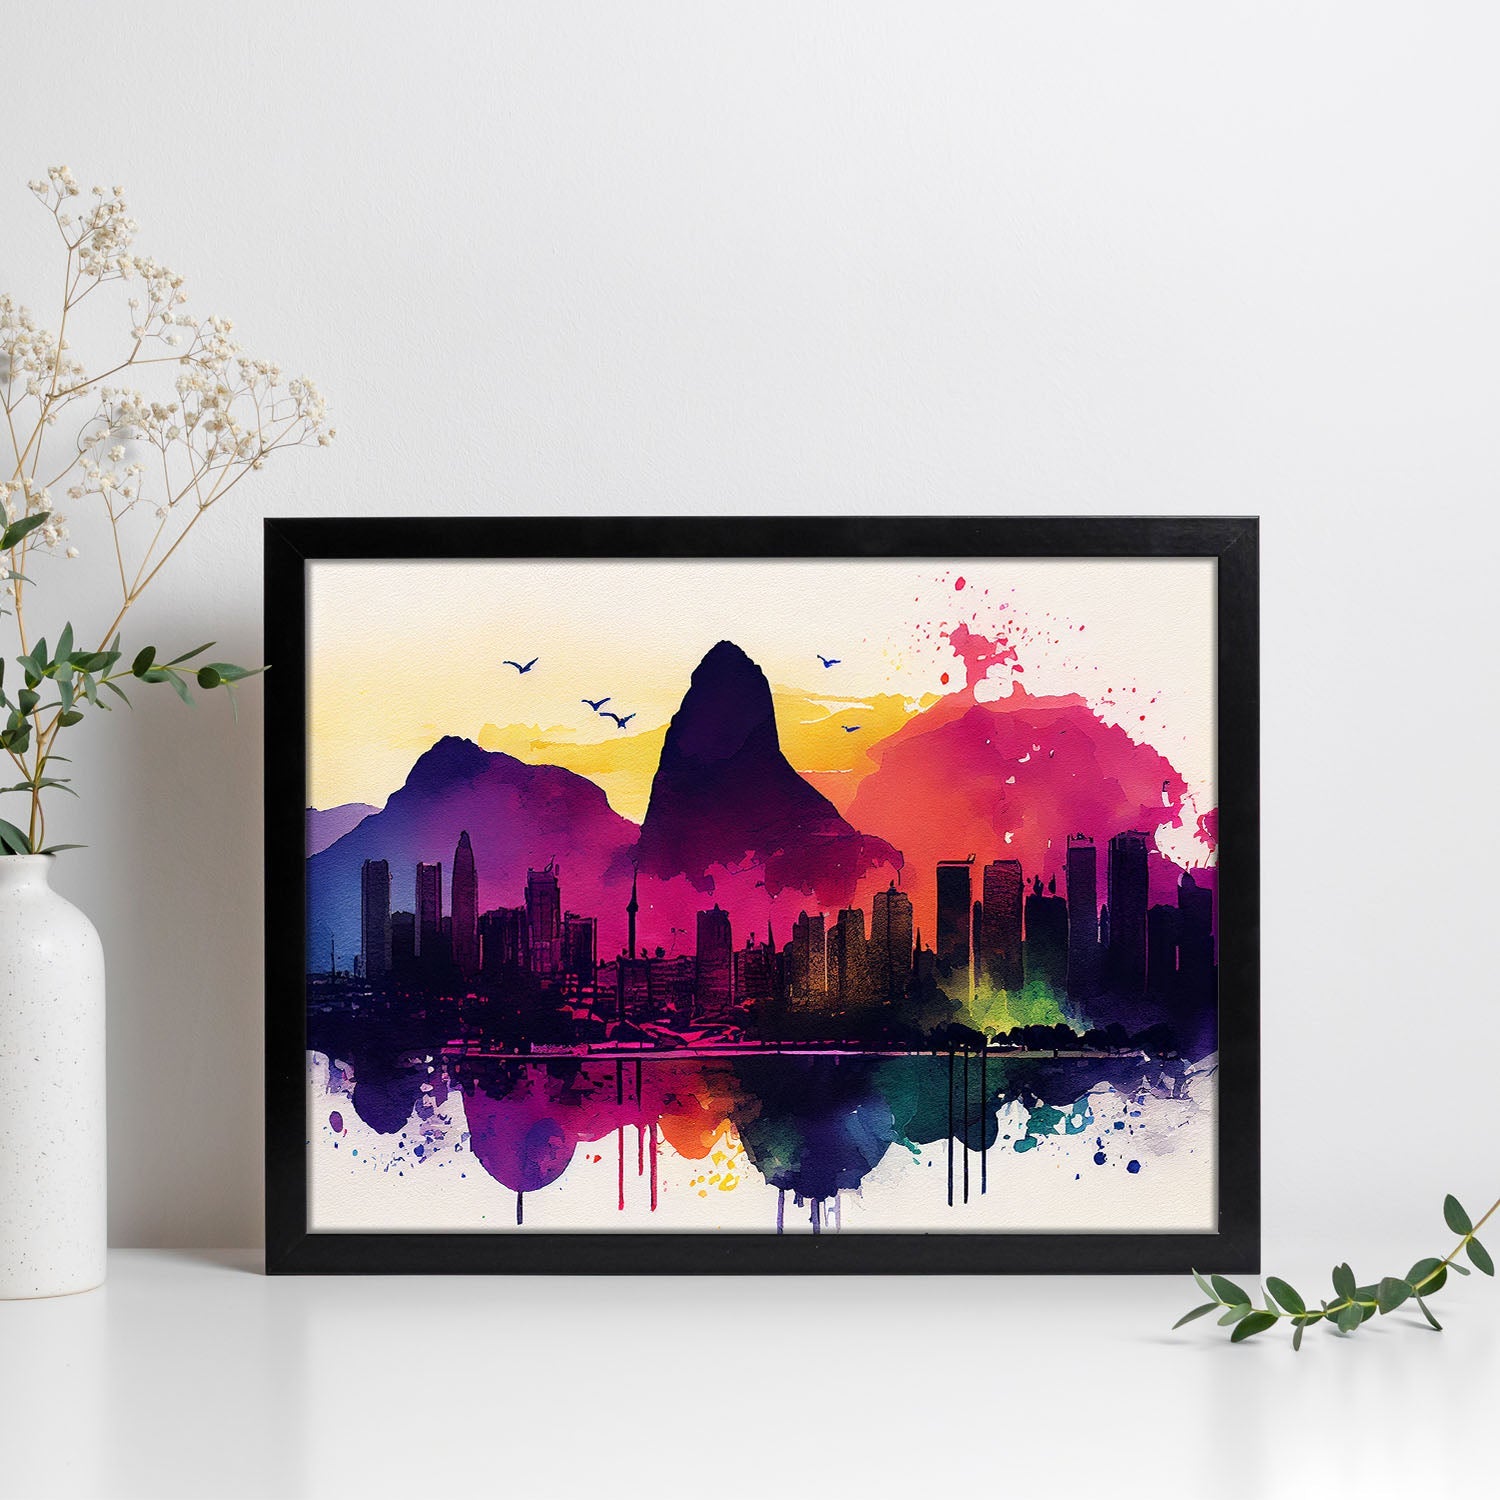 Nacnic watercolor of a skyline of the city of Rio de Janeiro_2. Aesthetic Wall Art Prints for Bedroom or Living Room Design.-Artwork-Nacnic-A4-Sin Marco-Nacnic Estudio SL